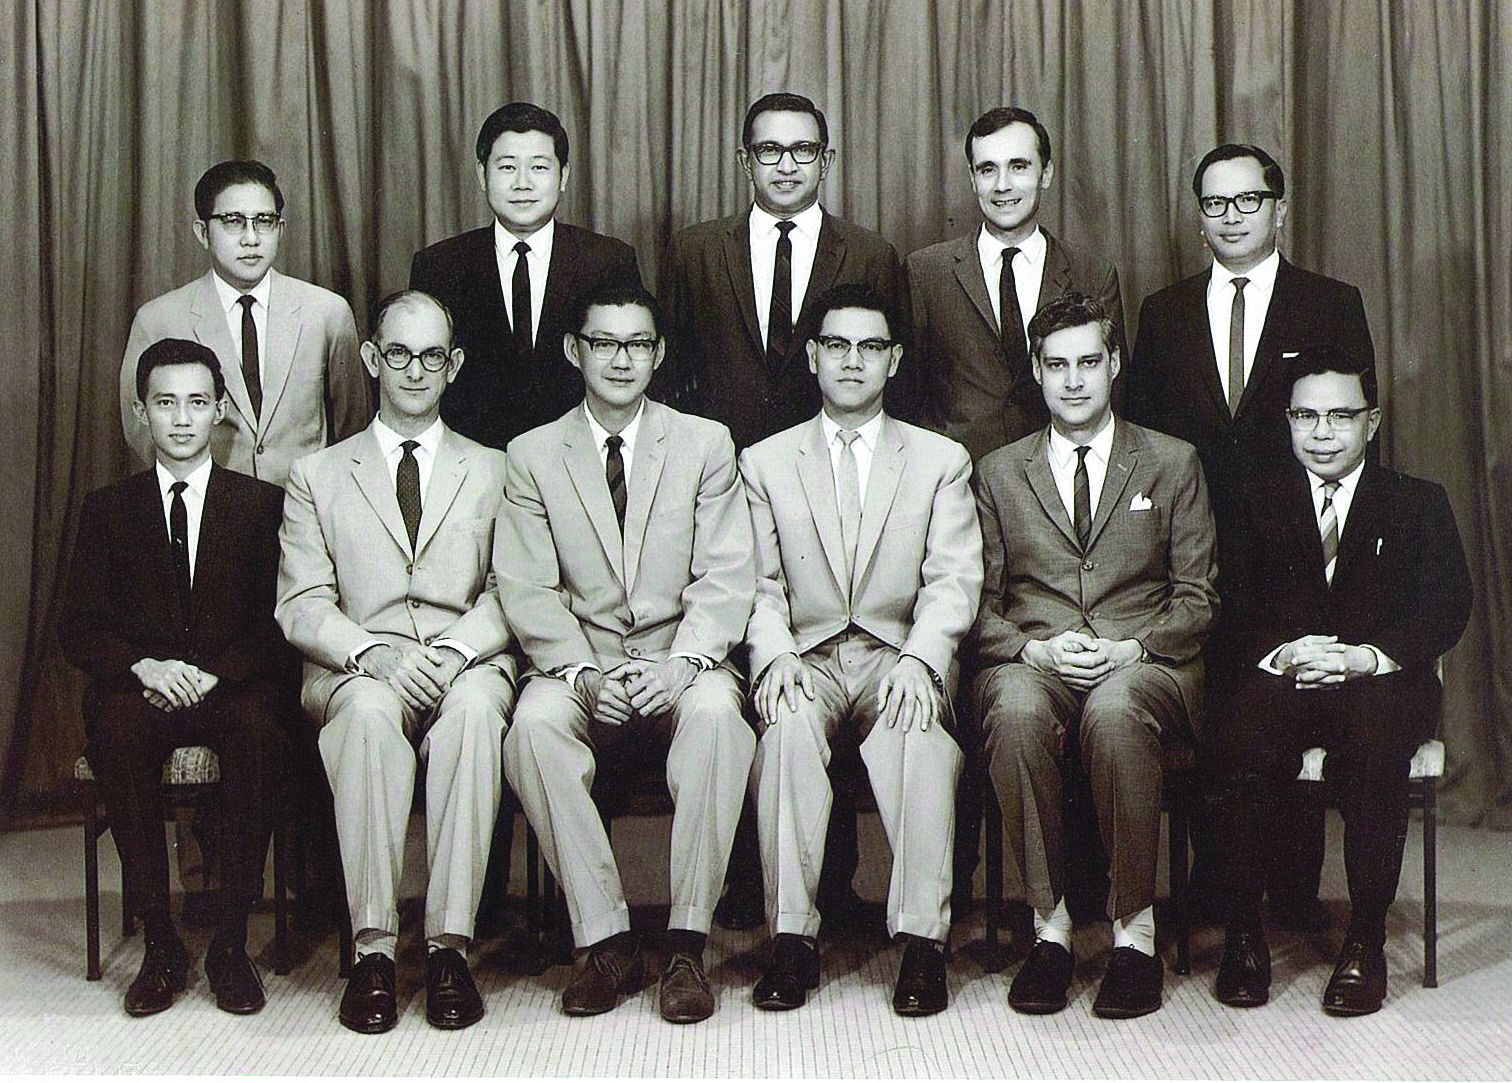 1965: The 1965/1966 Singapore Society of Accountants Council